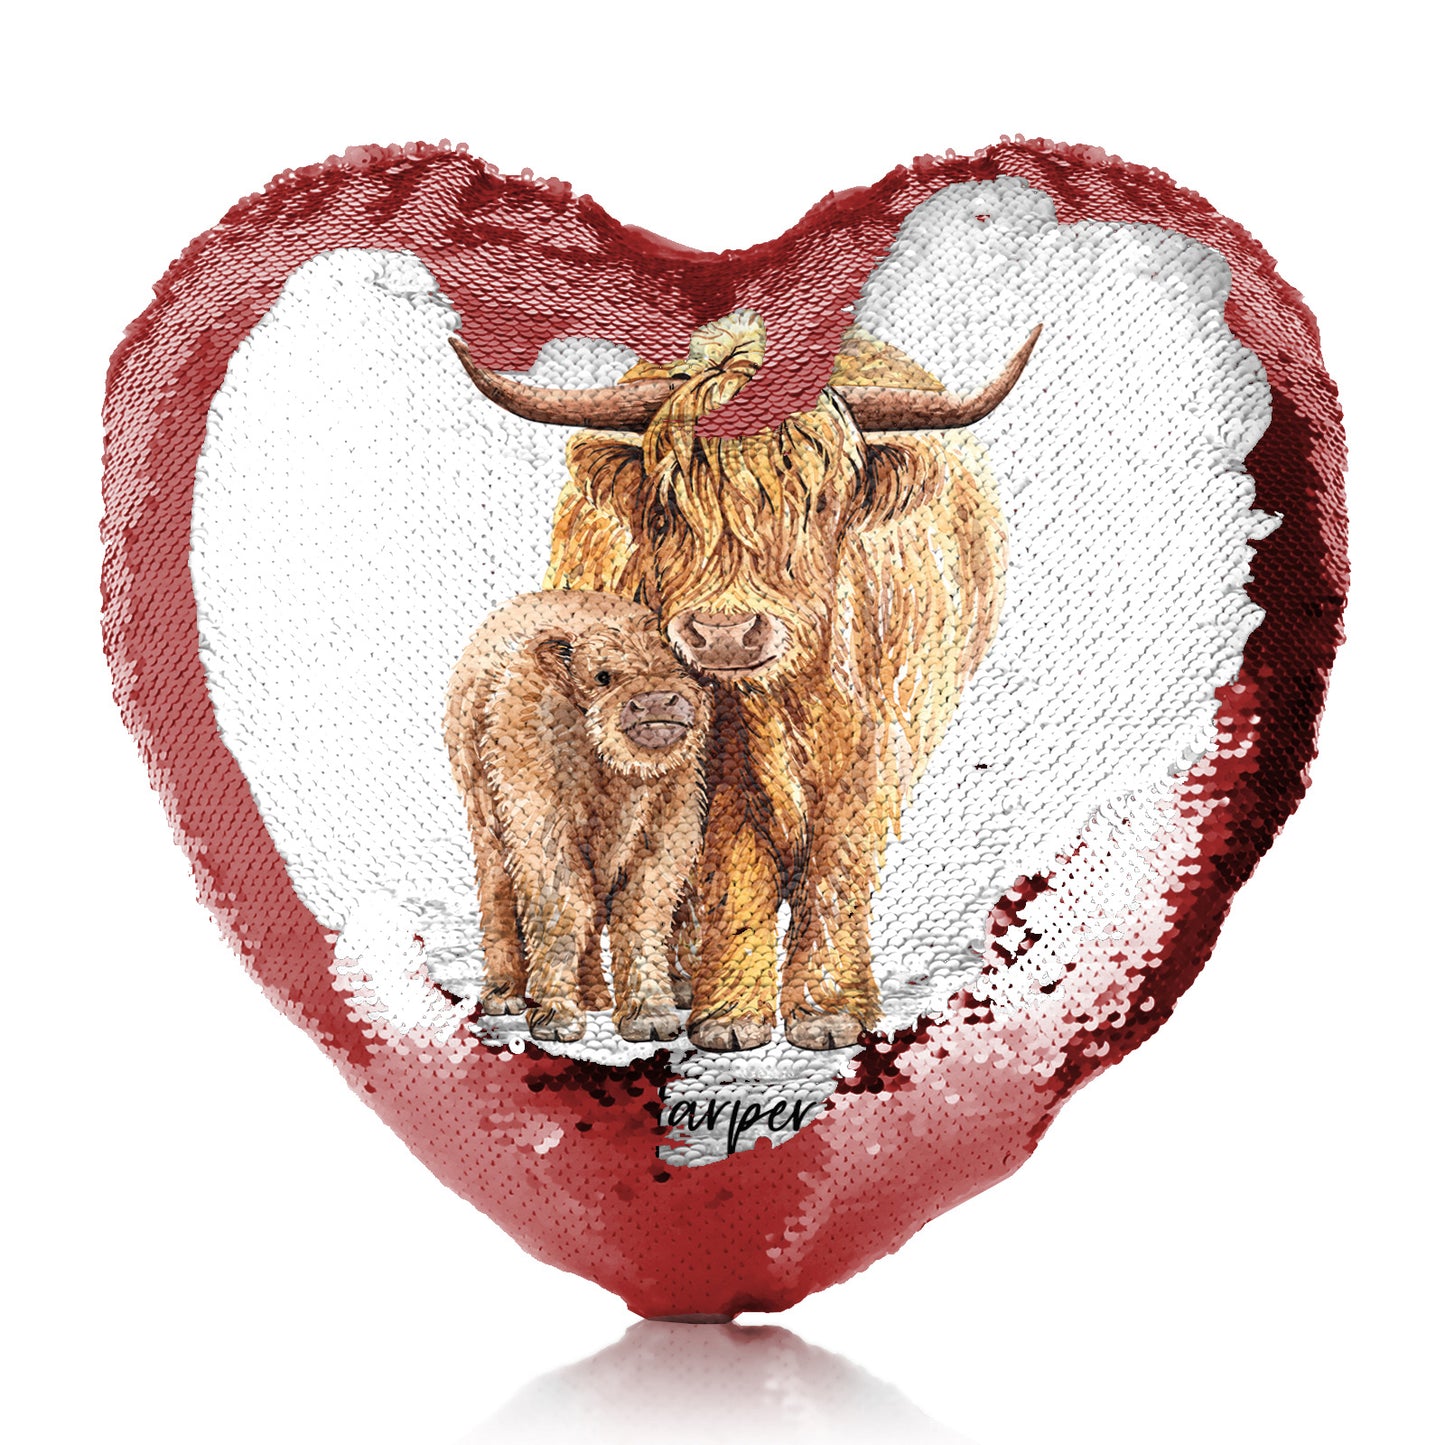 Personalised Sequin Heart Cushion with Welcoming Text and Relaxing Mum and Baby Highland Cows